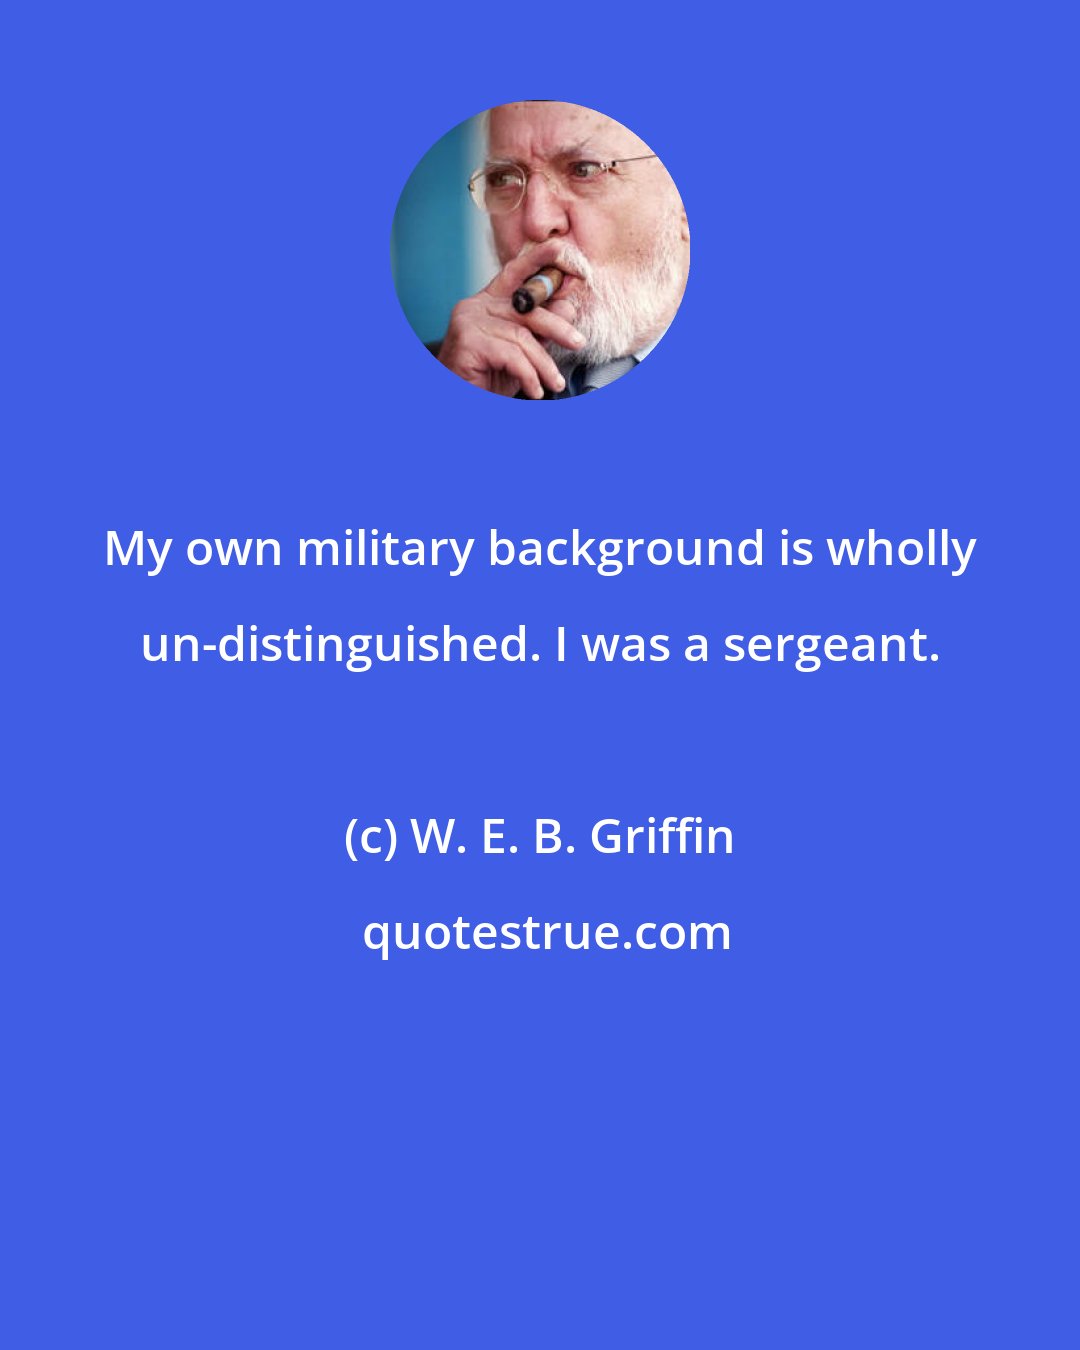 W. E. B. Griffin: My own military background is wholly un-distinguished. I was a sergeant.